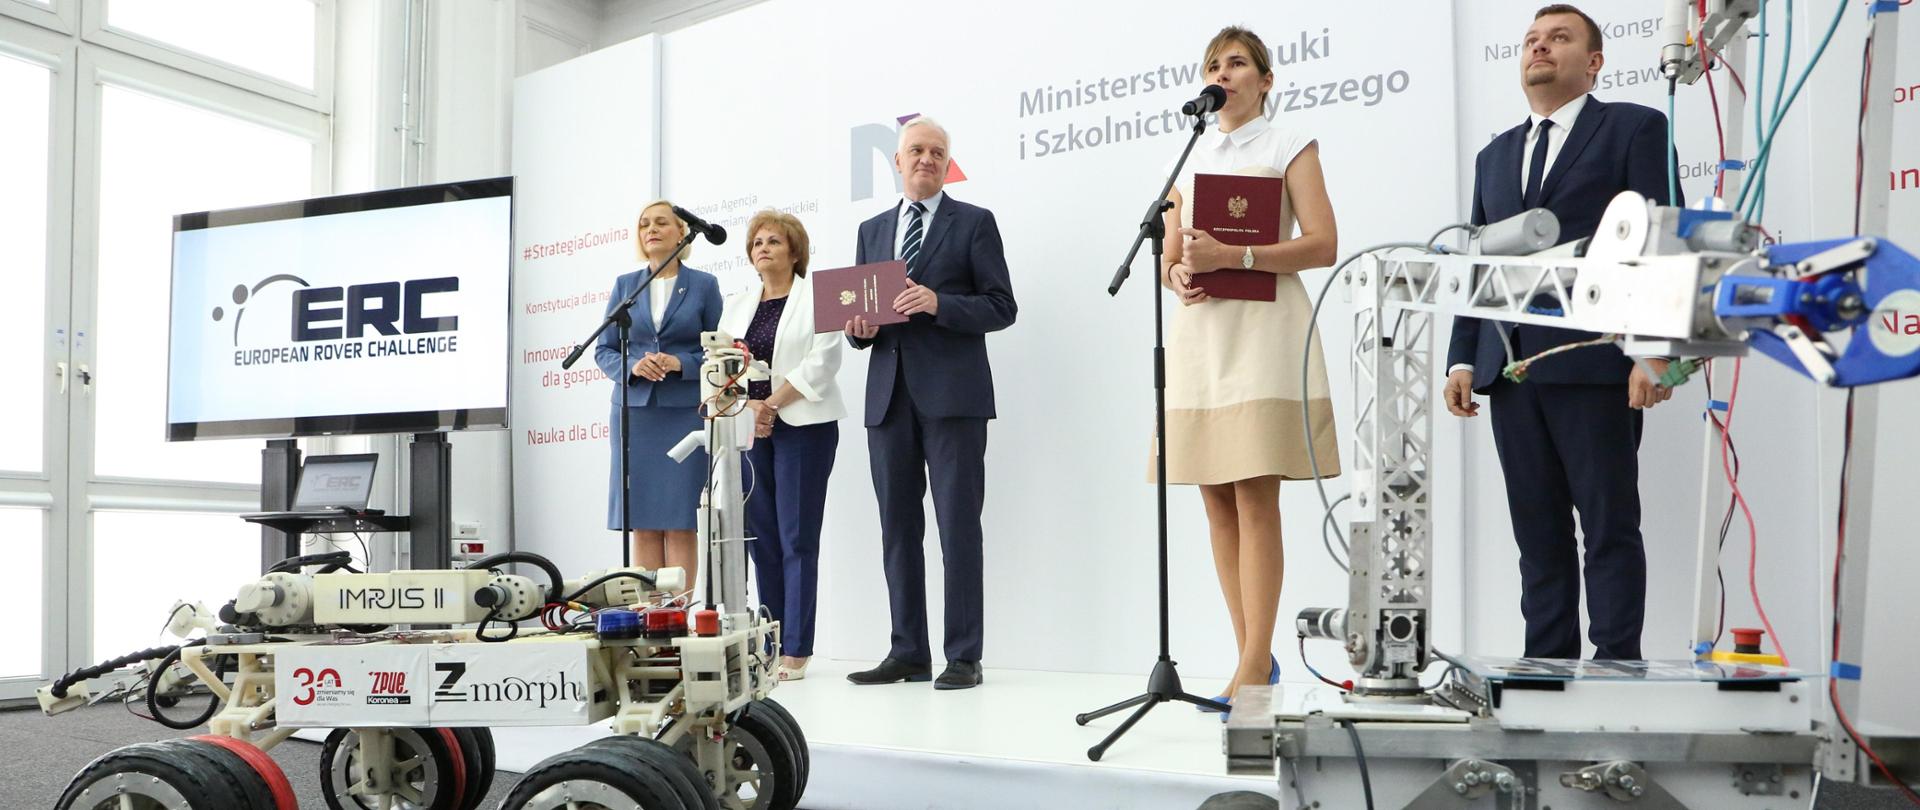 Minister Gowin i roboty